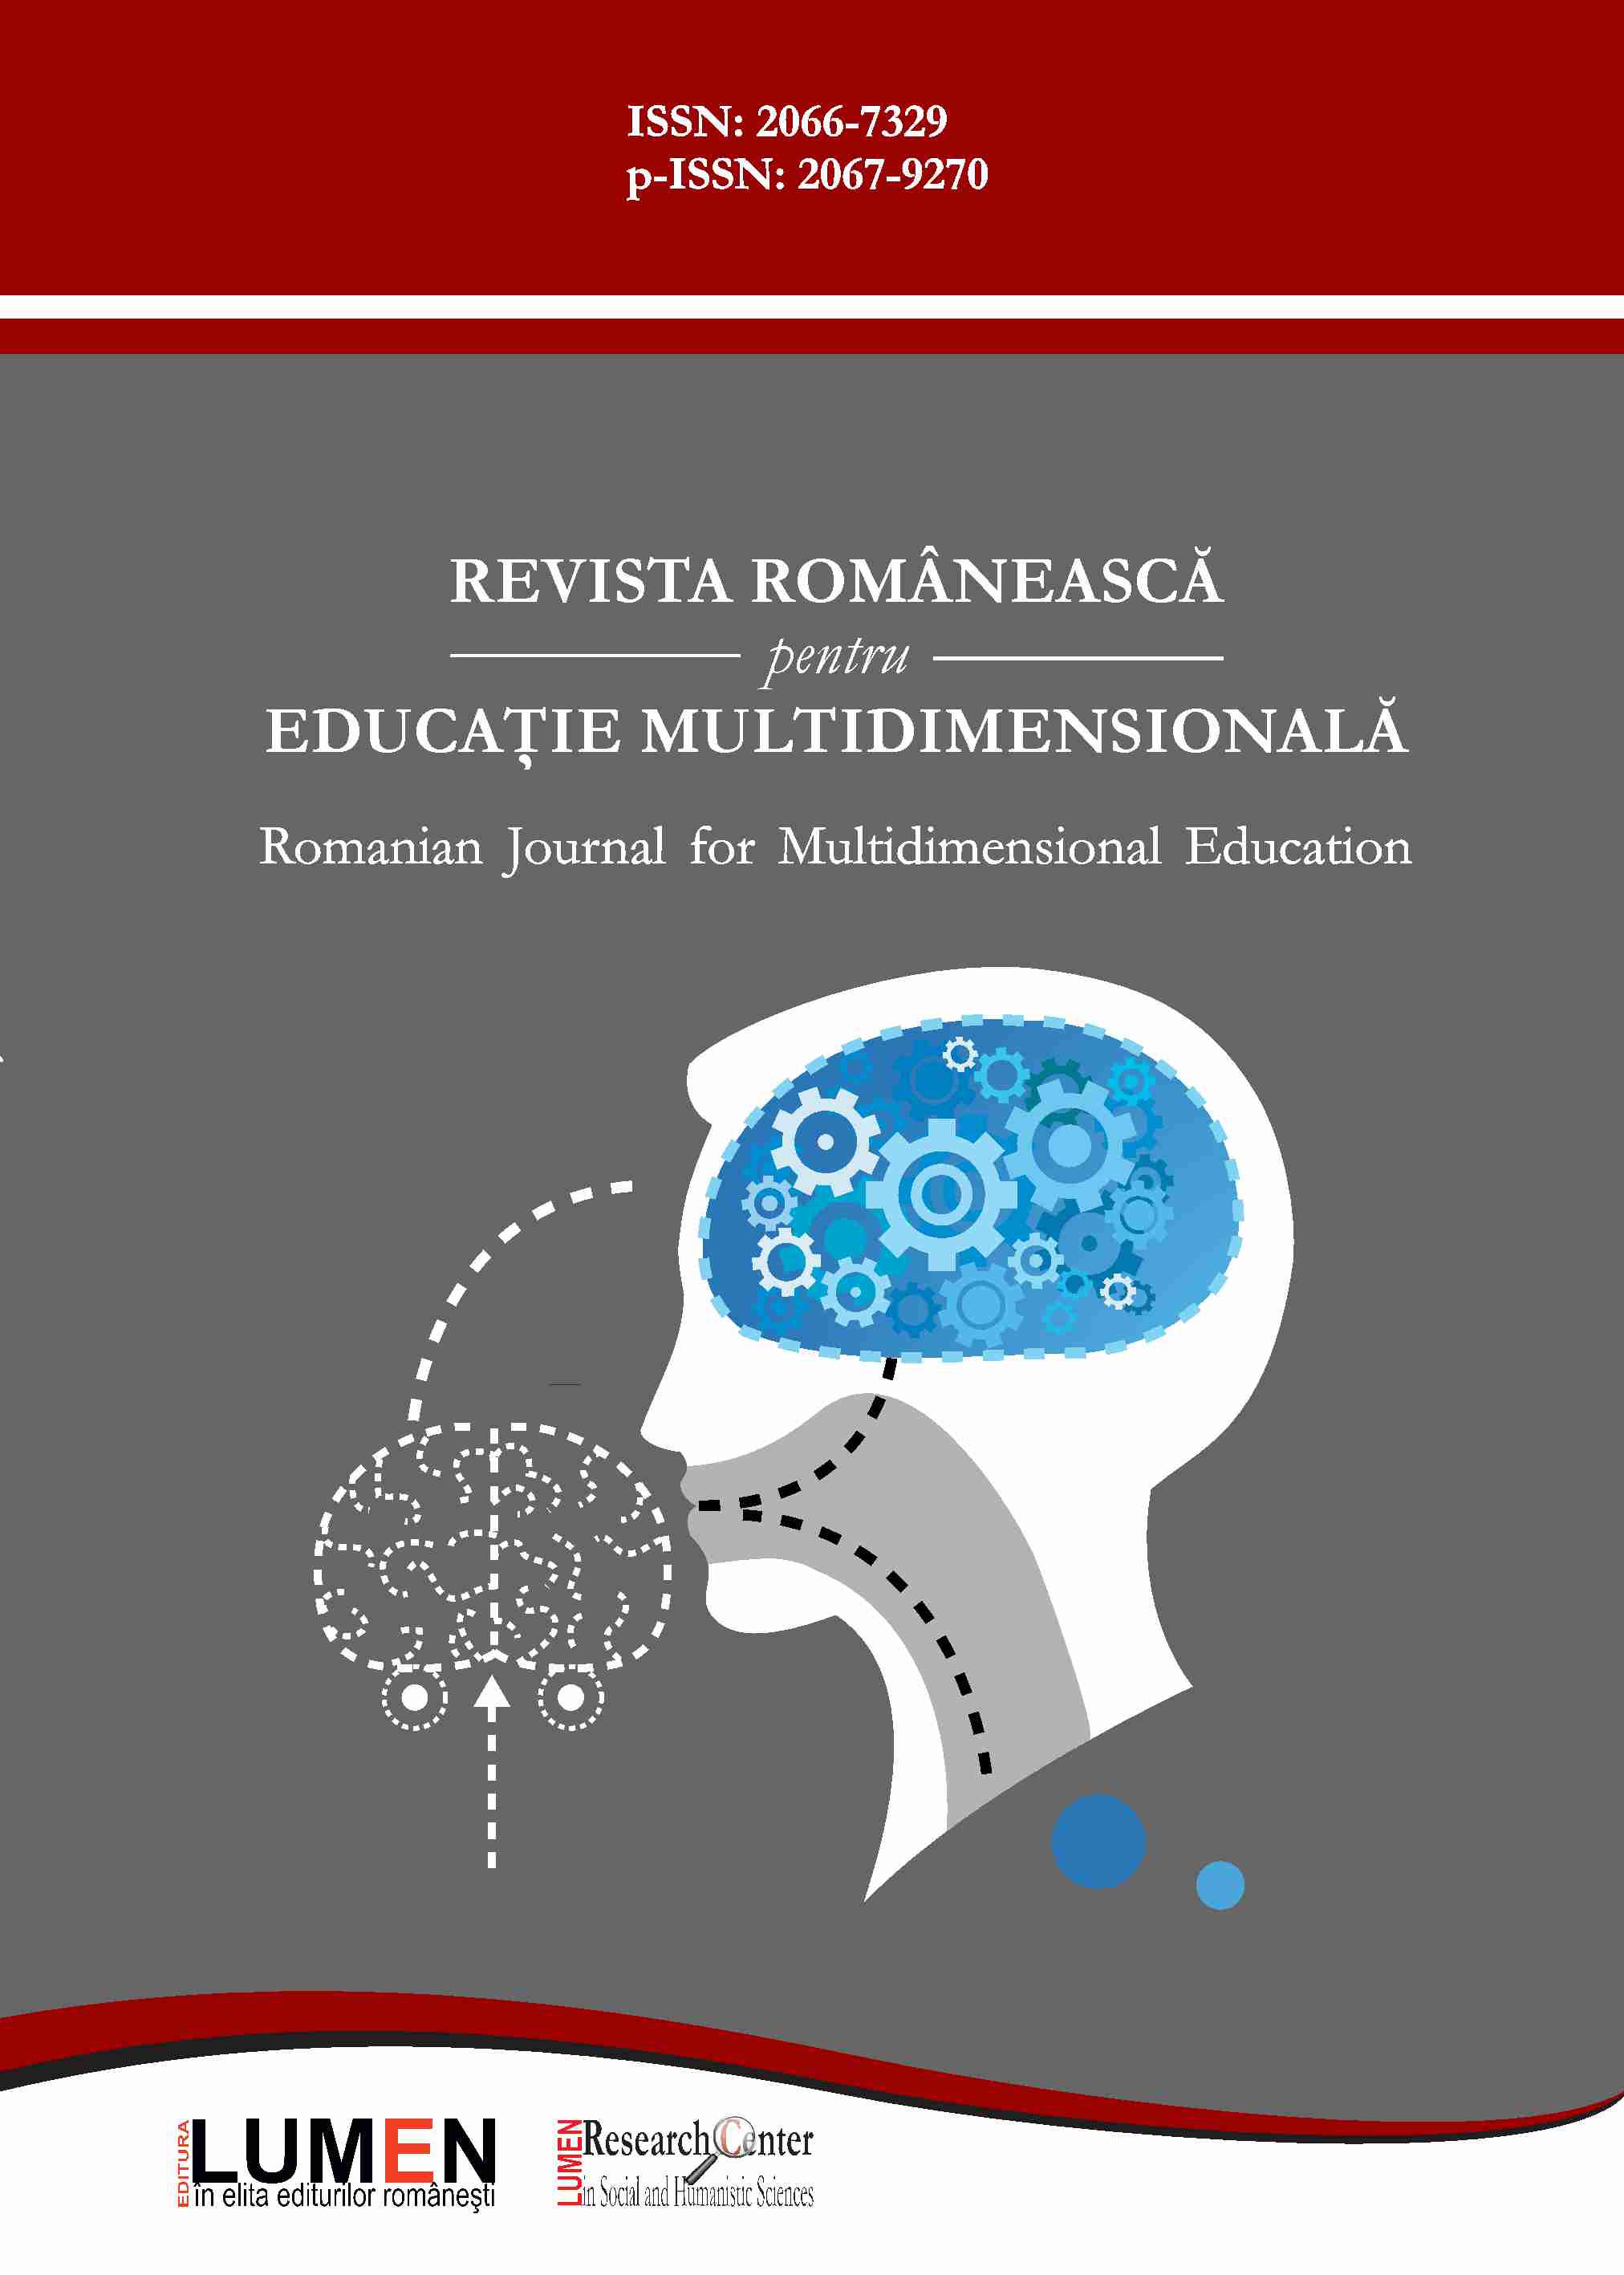 Emotional Intelligence in the Context of Personal Dispositions Development of Students - Future Psychologists